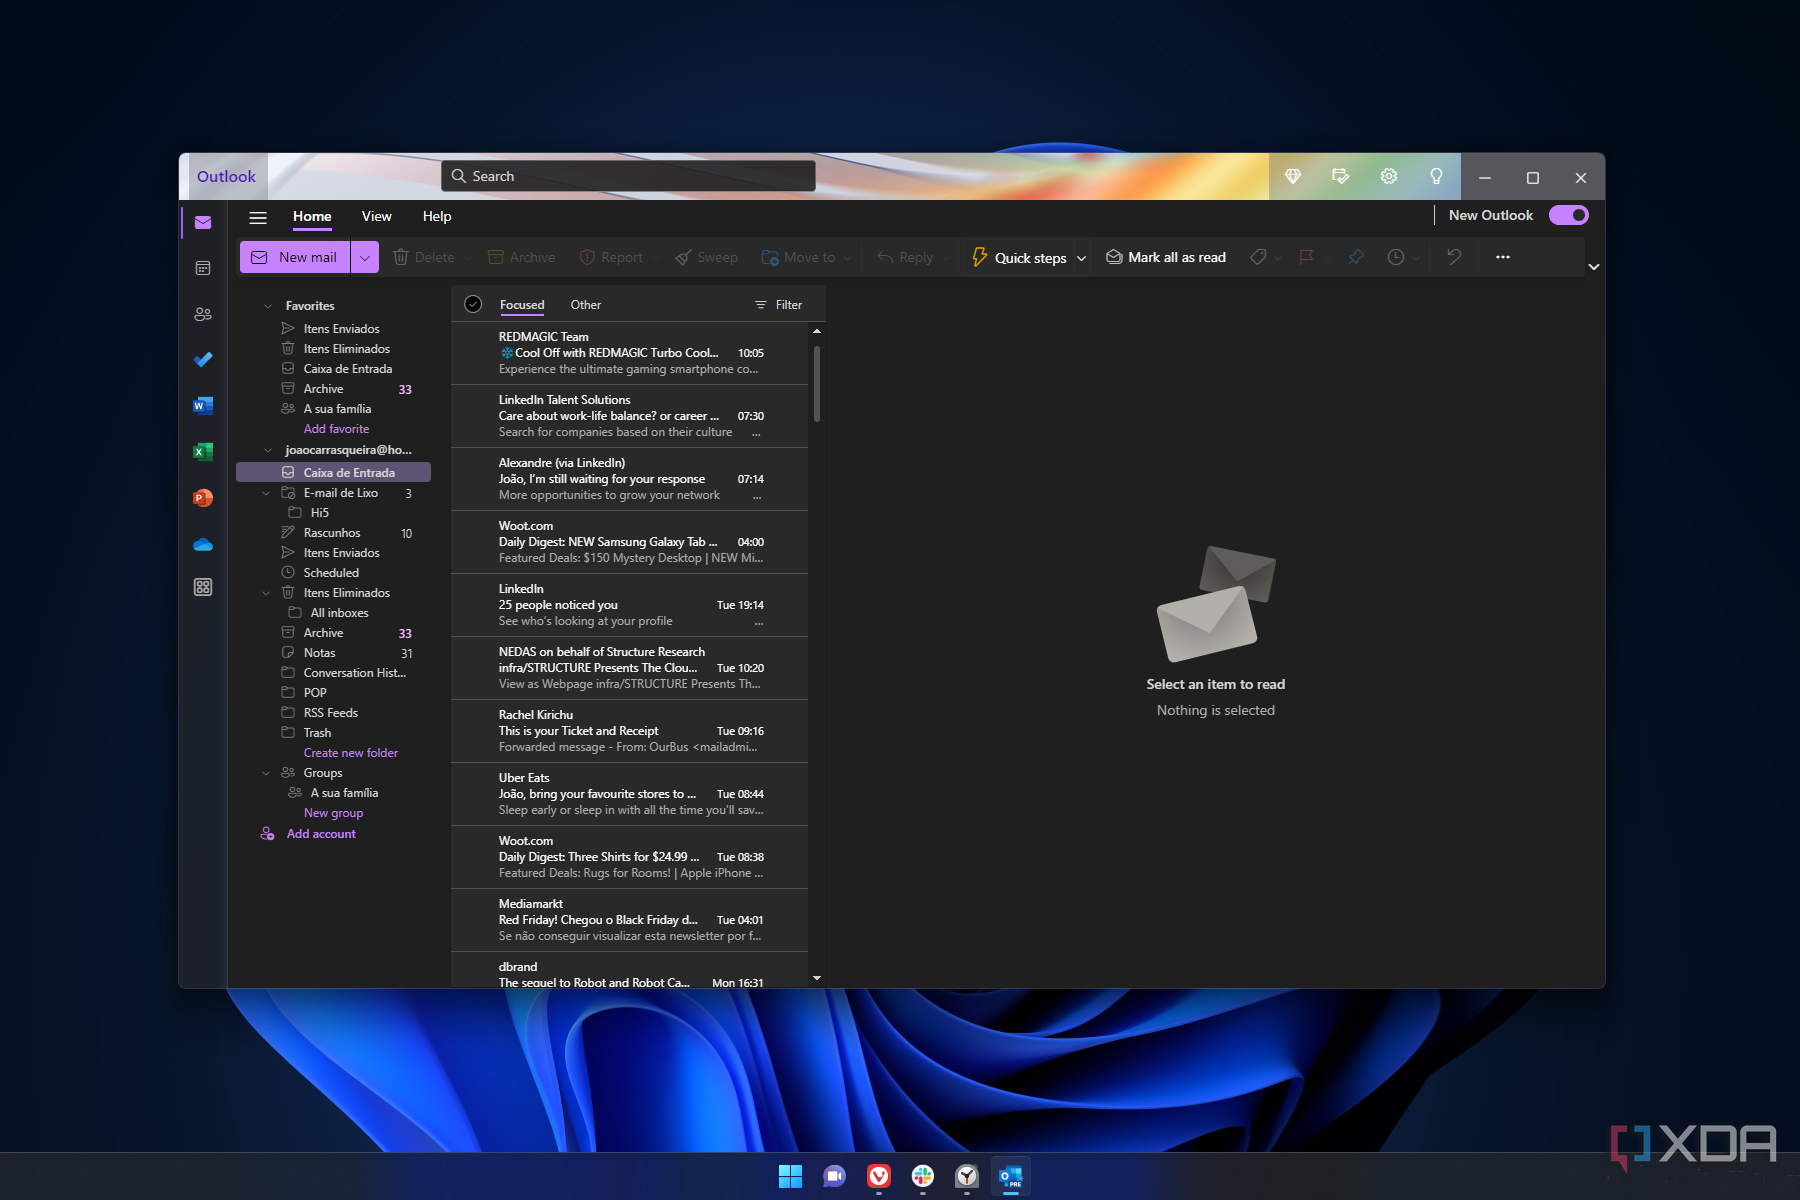 Replacing the Mail app will only make Windows 11 worse for touchscreens